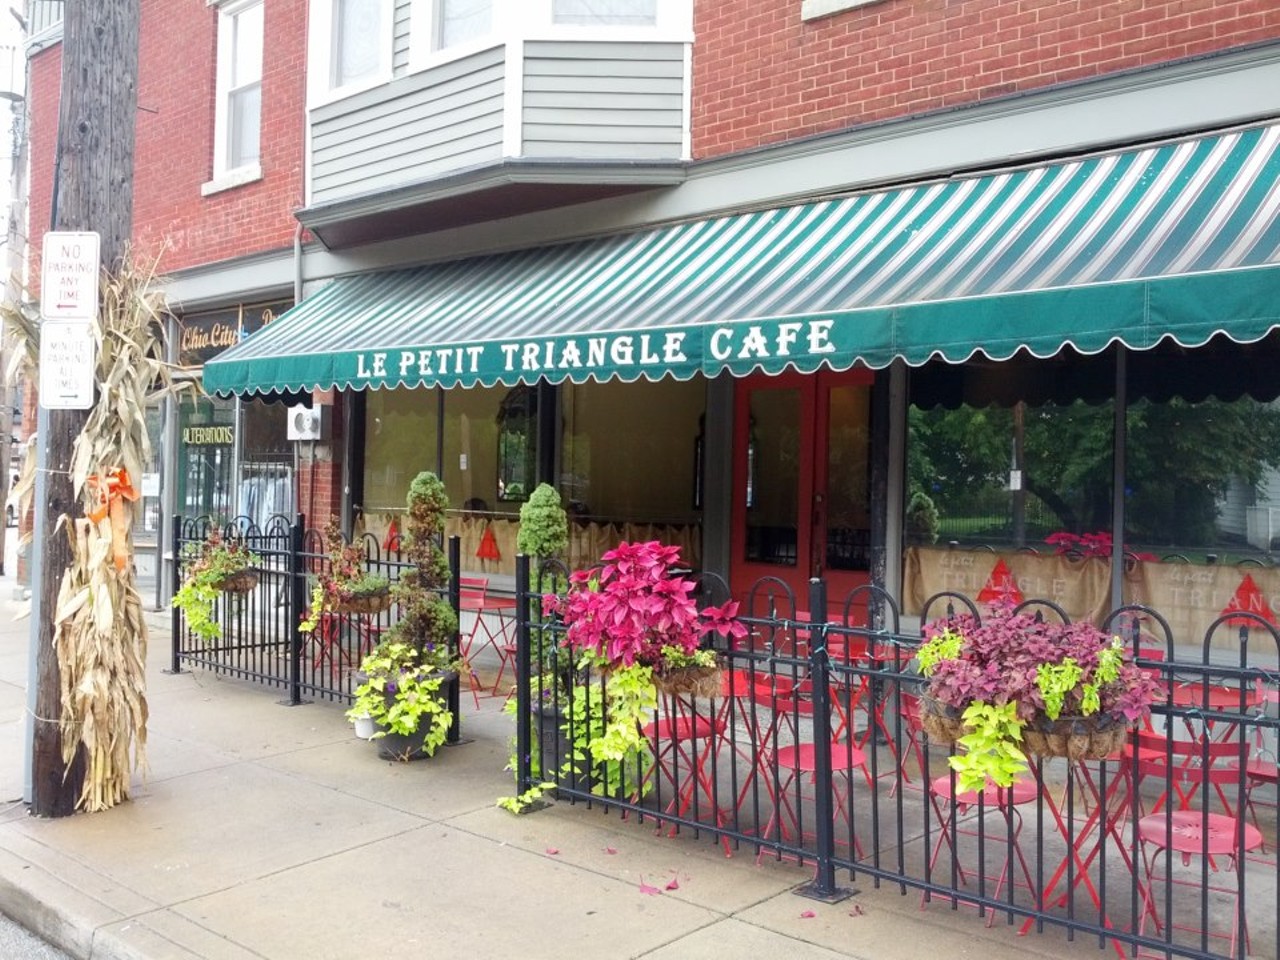  Le Petit Triangle Cafe
1881 Fulton Rd. 
This little French inspired spot is an Ohio City favorite. With your sweet or savory crepe make sure to also order a glass of champagne, red or white wine, or a Great Lakes brew. Unlike most Cleveland spots, brunch here is everyday starting 10 a.m. (Photo courtesy of Le Petit Triangle Cafe/Facebook)